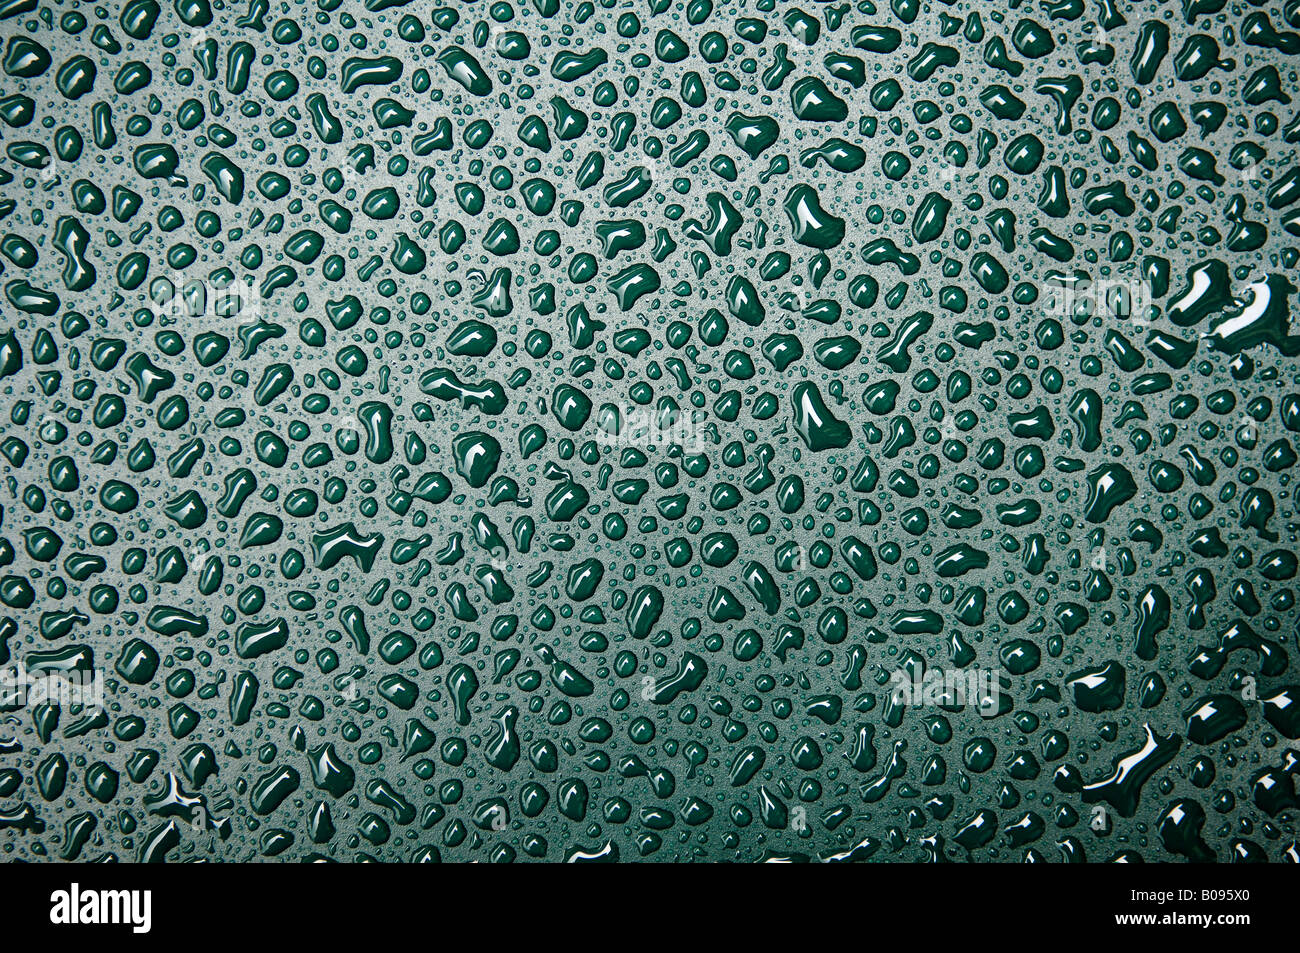 Drops of water, water droplets on green surface Stock Photo